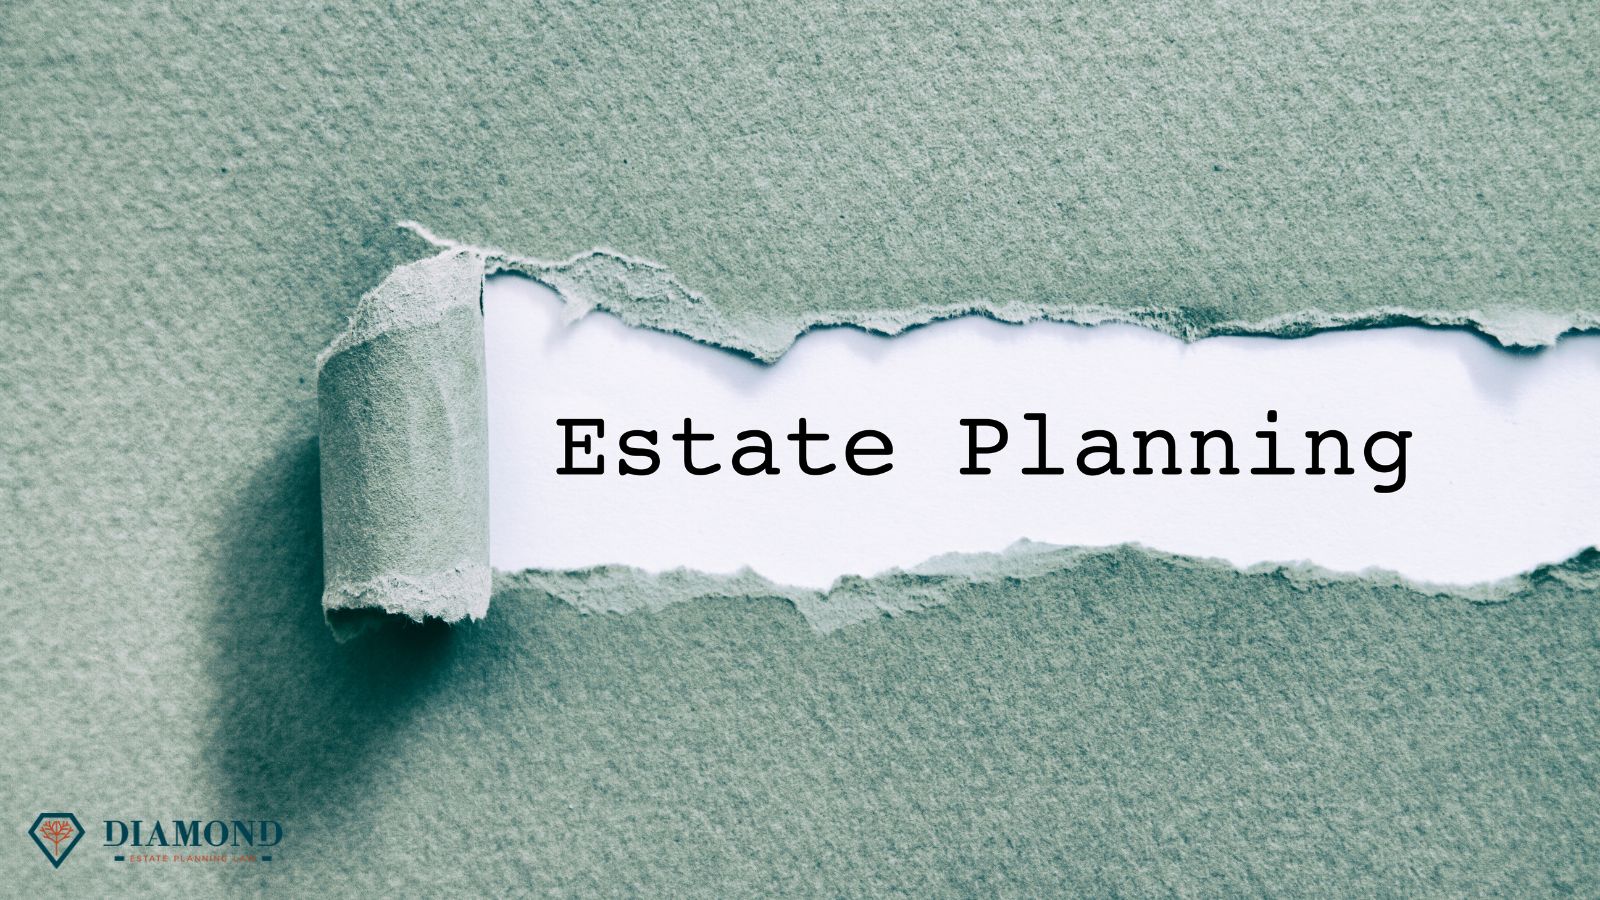 Image with a teal overlay peeled back to reveal the words "estate planning".